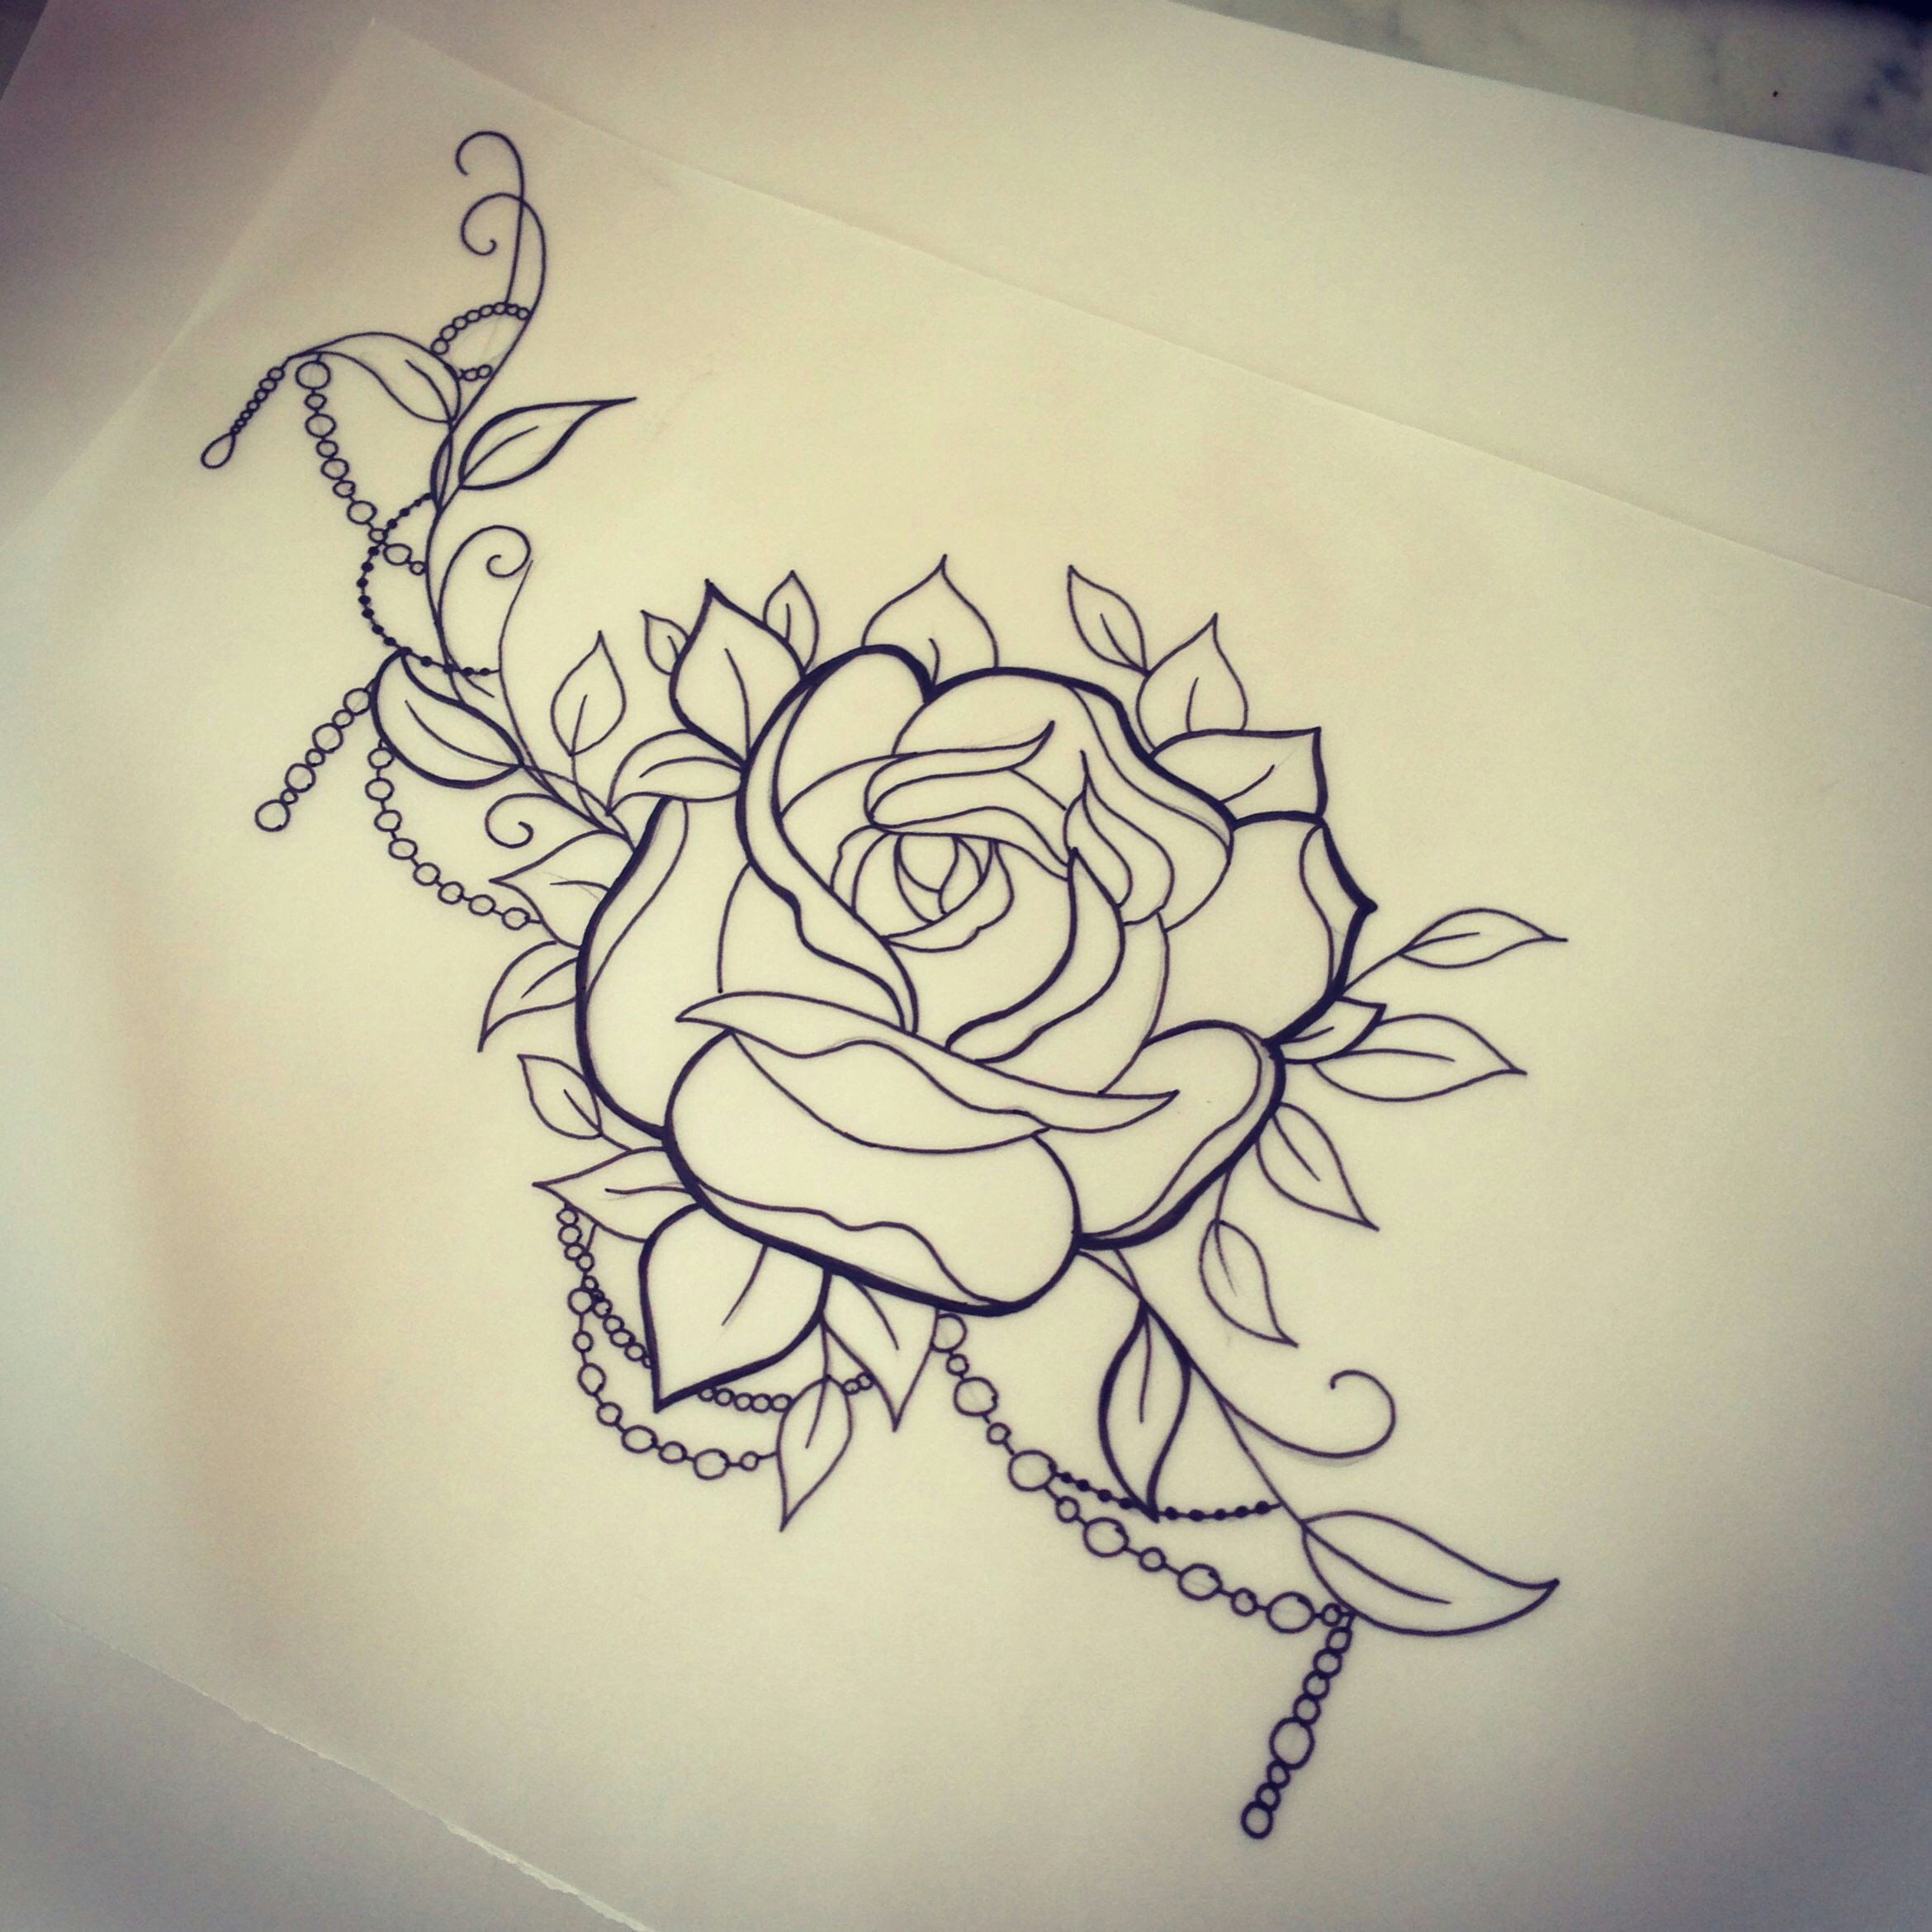 Drawings Of Roses for Tattoos Rose and Beads Pictures Drawings Tattoo Drawings Tattoos